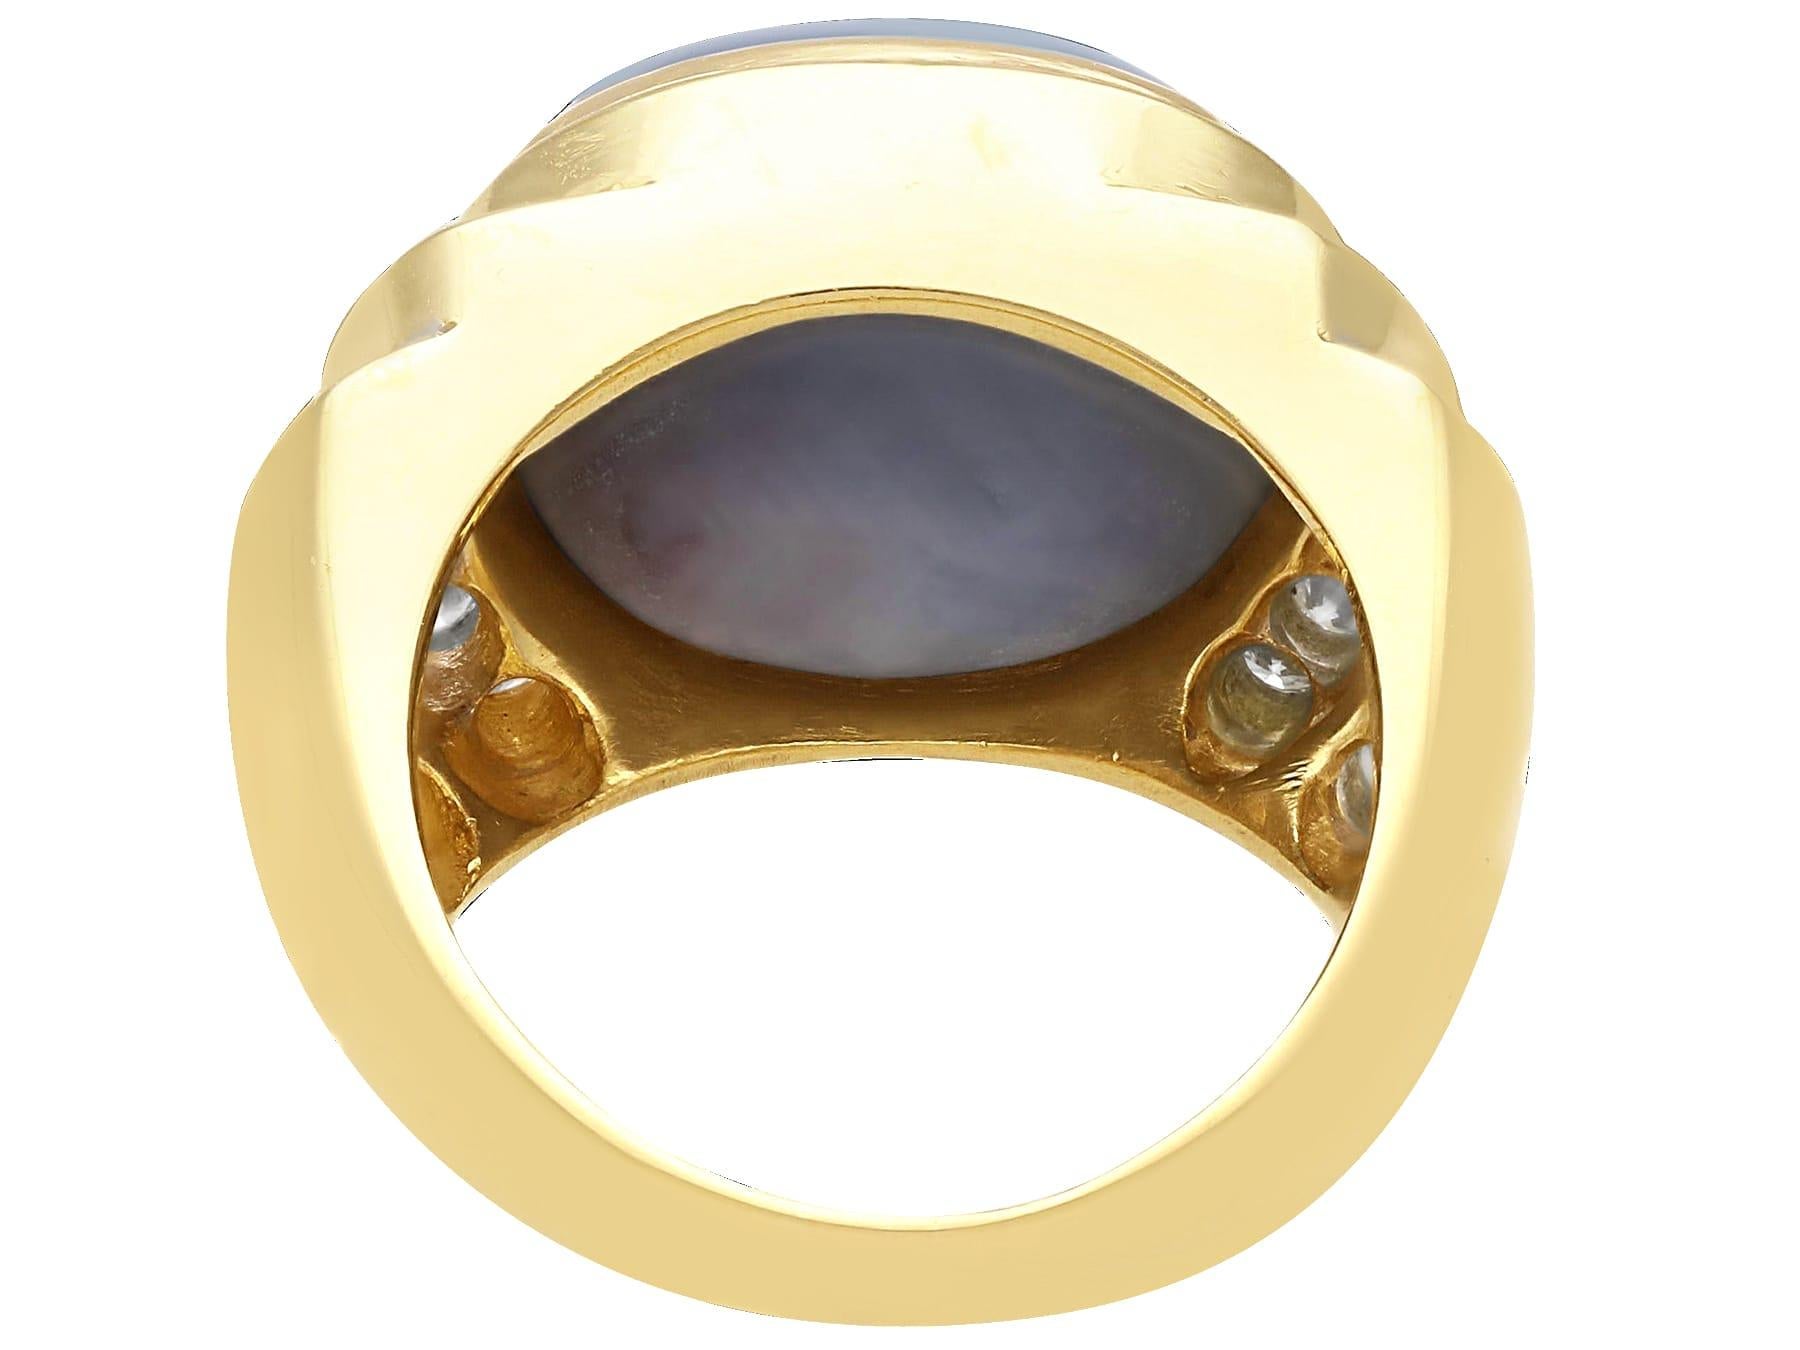 Vintage 17.50 Carat Star Sapphire and Diamond Yellow Gold Dress Ring, circa 1980 In Excellent Condition For Sale In Jesmond, Newcastle Upon Tyne